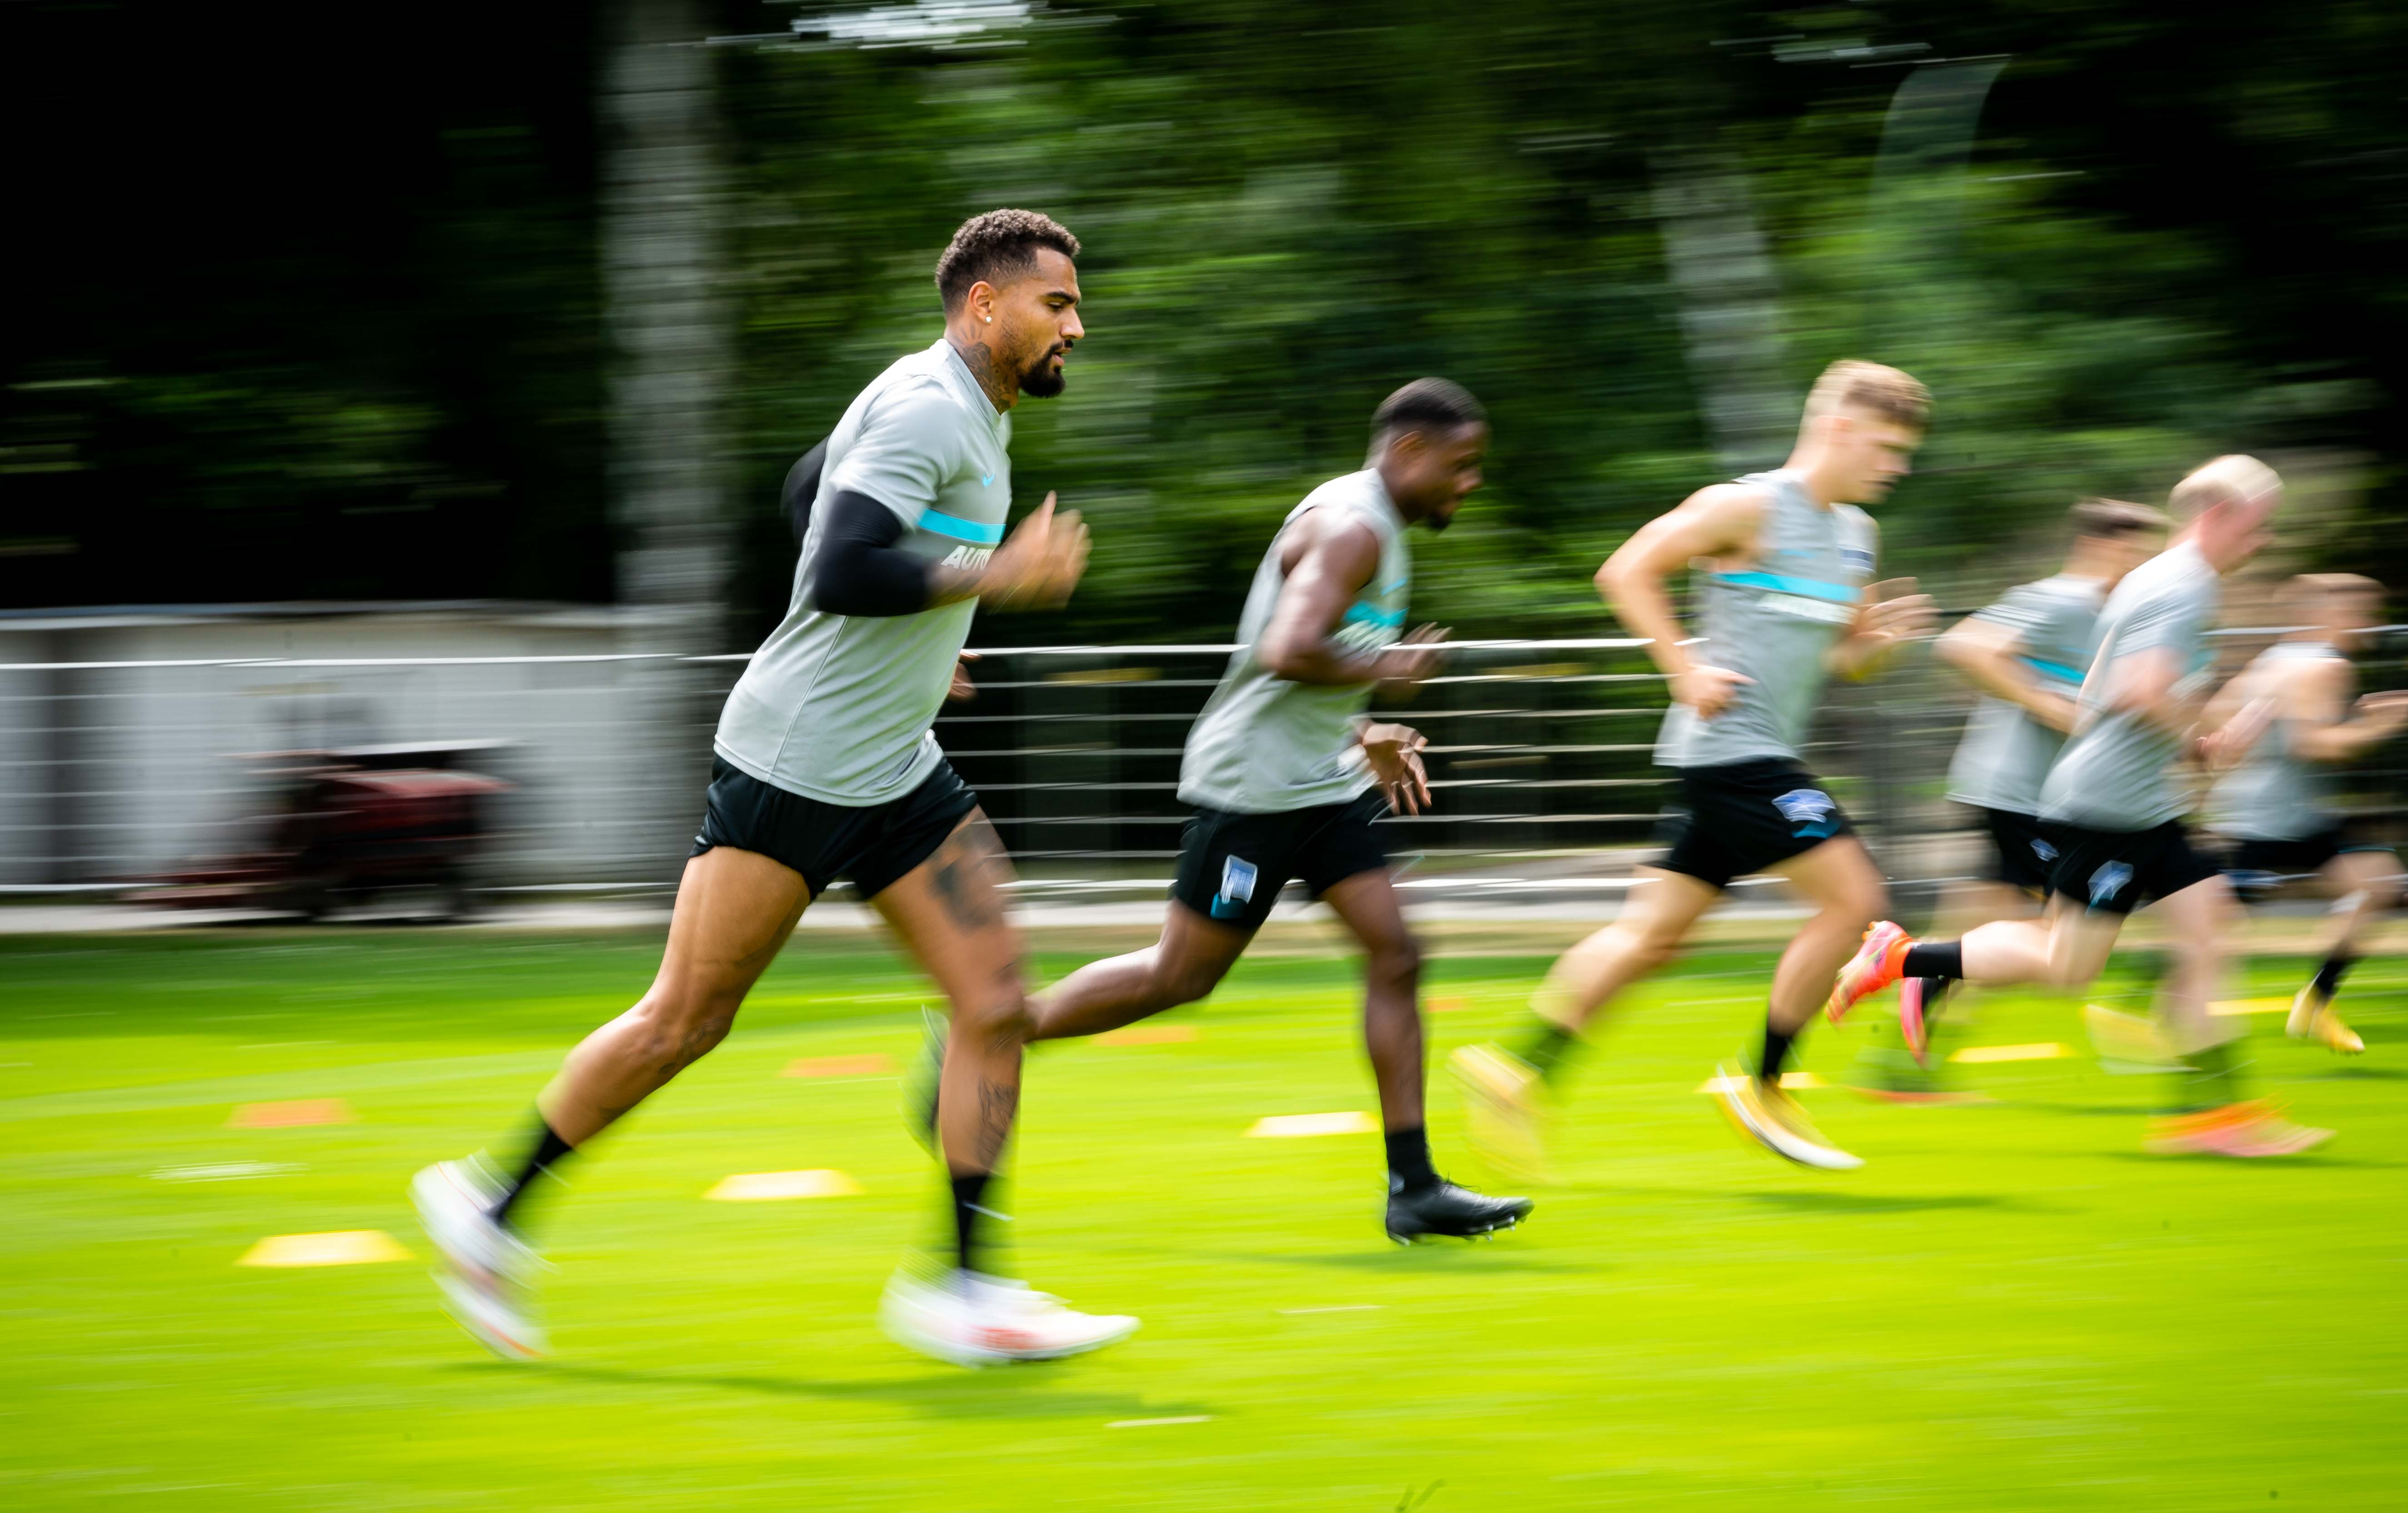 Prince Boateng and his teammates during the beep test.